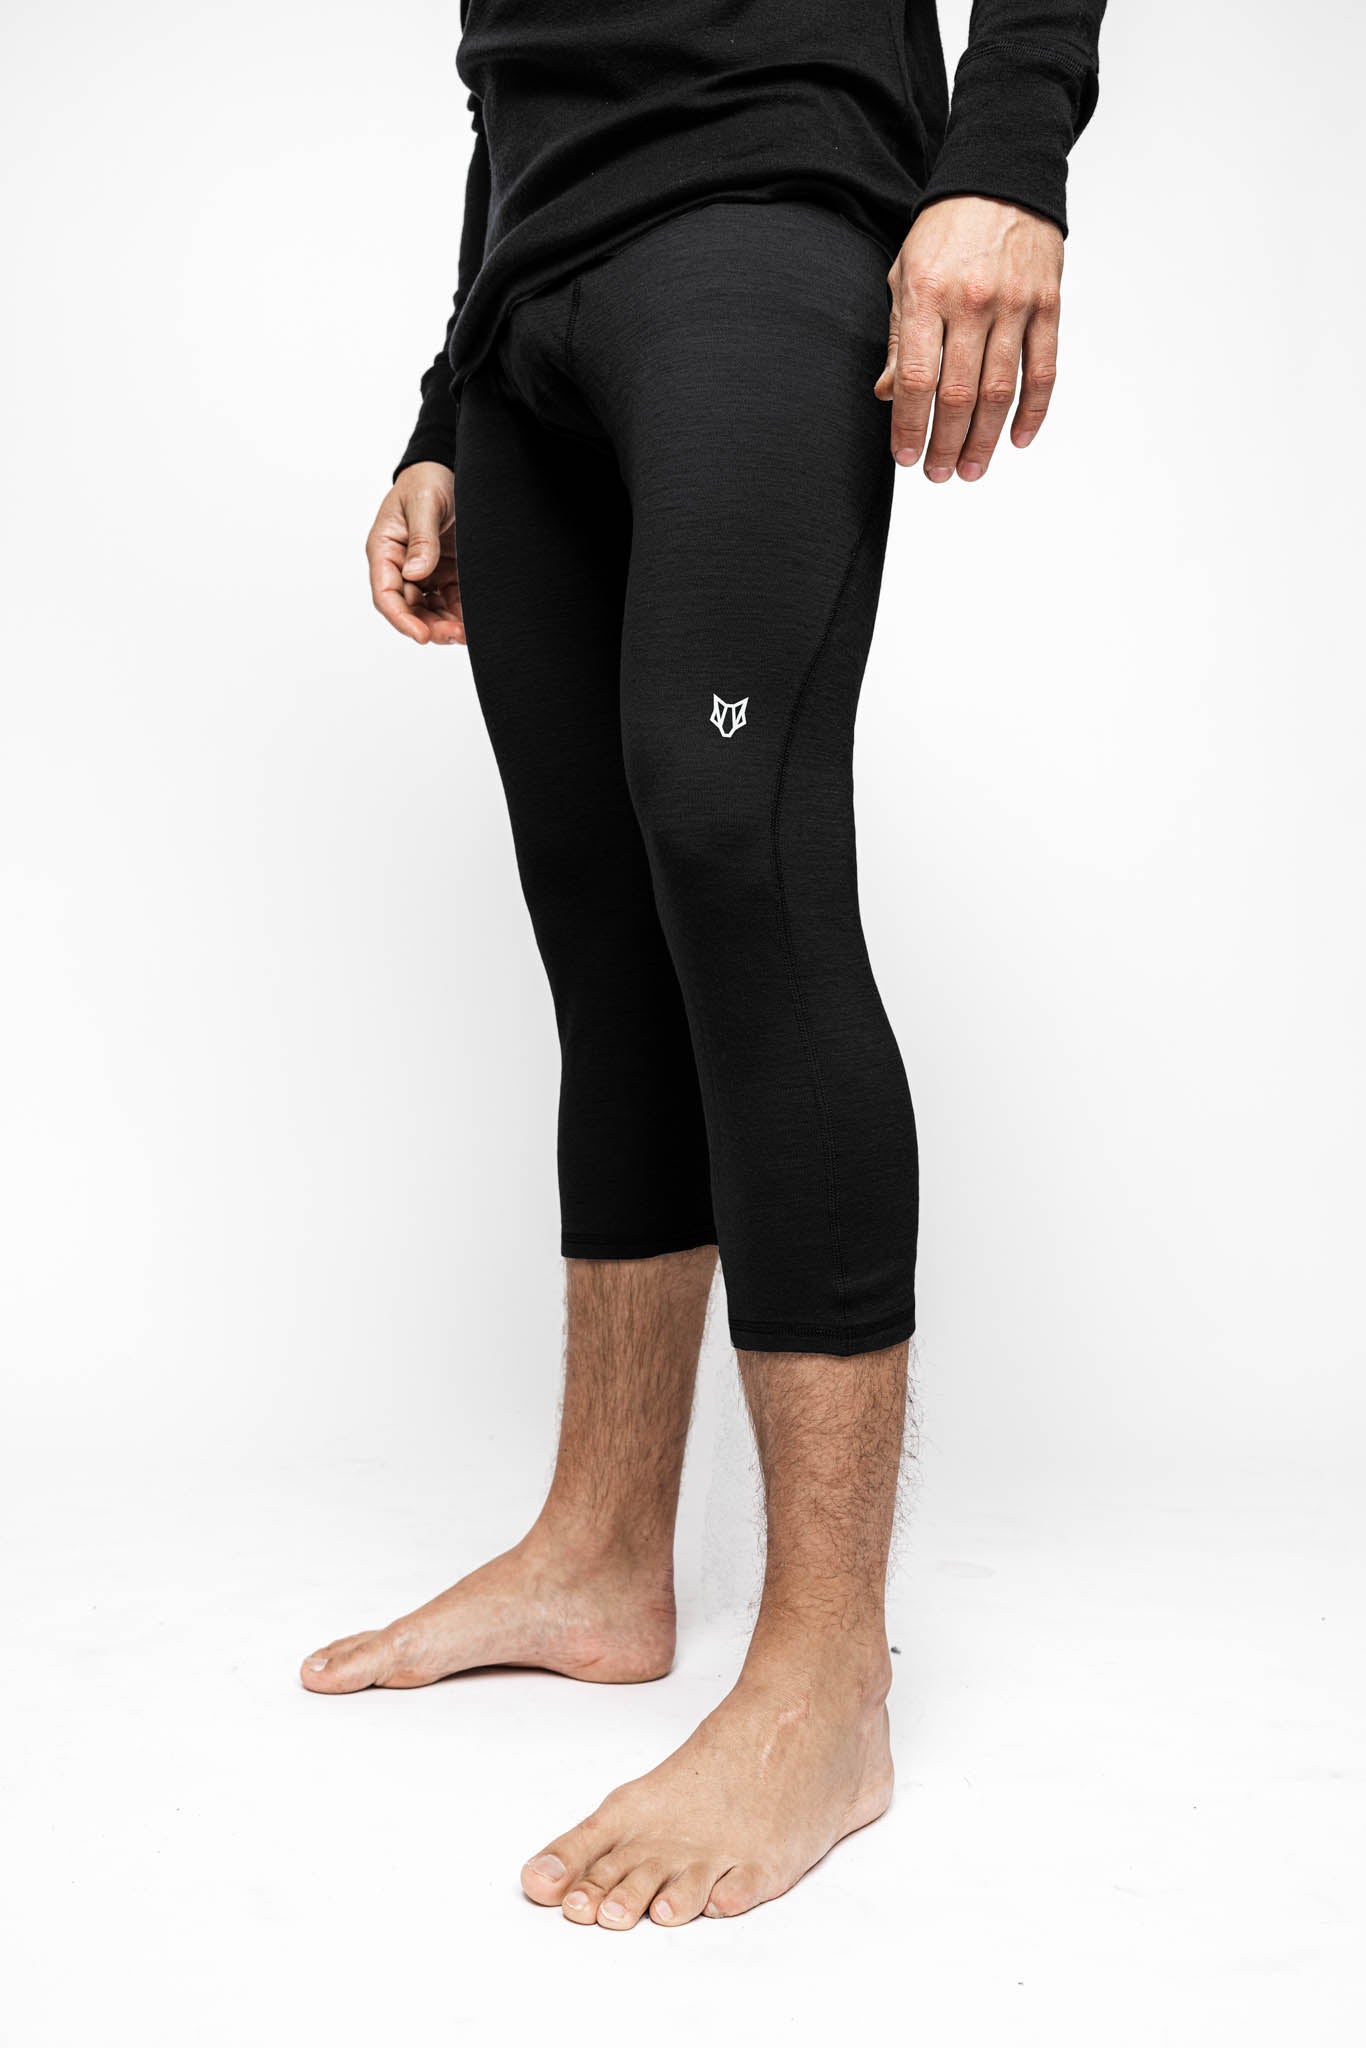 Merino Wool Base Layer Thermal Pants For Men And Women Warm, Breathable,  Soft And Comfortable Everyday Wear 231206 From Piao04, $27.6